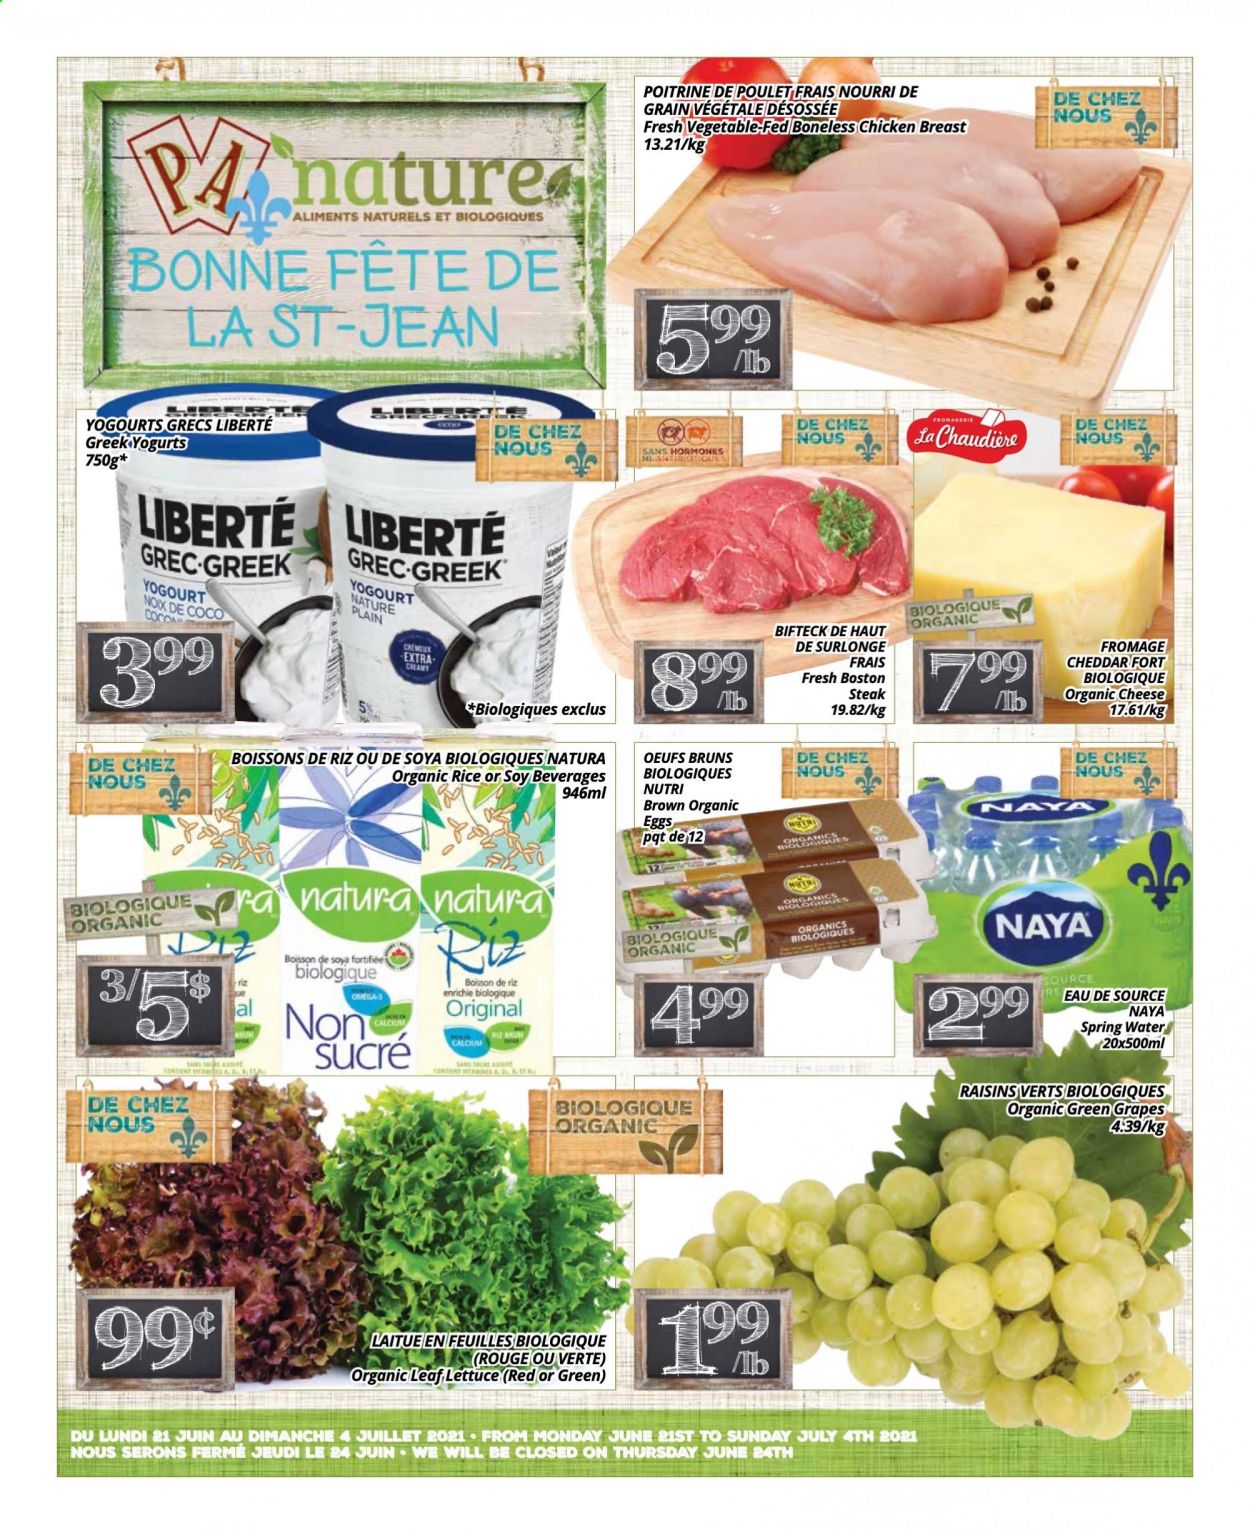 thumbnail - PA Nature Flyer - June 21, 2021 - July 04, 2021 - Sales products - lettuce, grapes, cheddar, cheese, eggs, cocoa, dried fruit, spring water, chicken breasts, chicken, raisins, steak. Page 1.